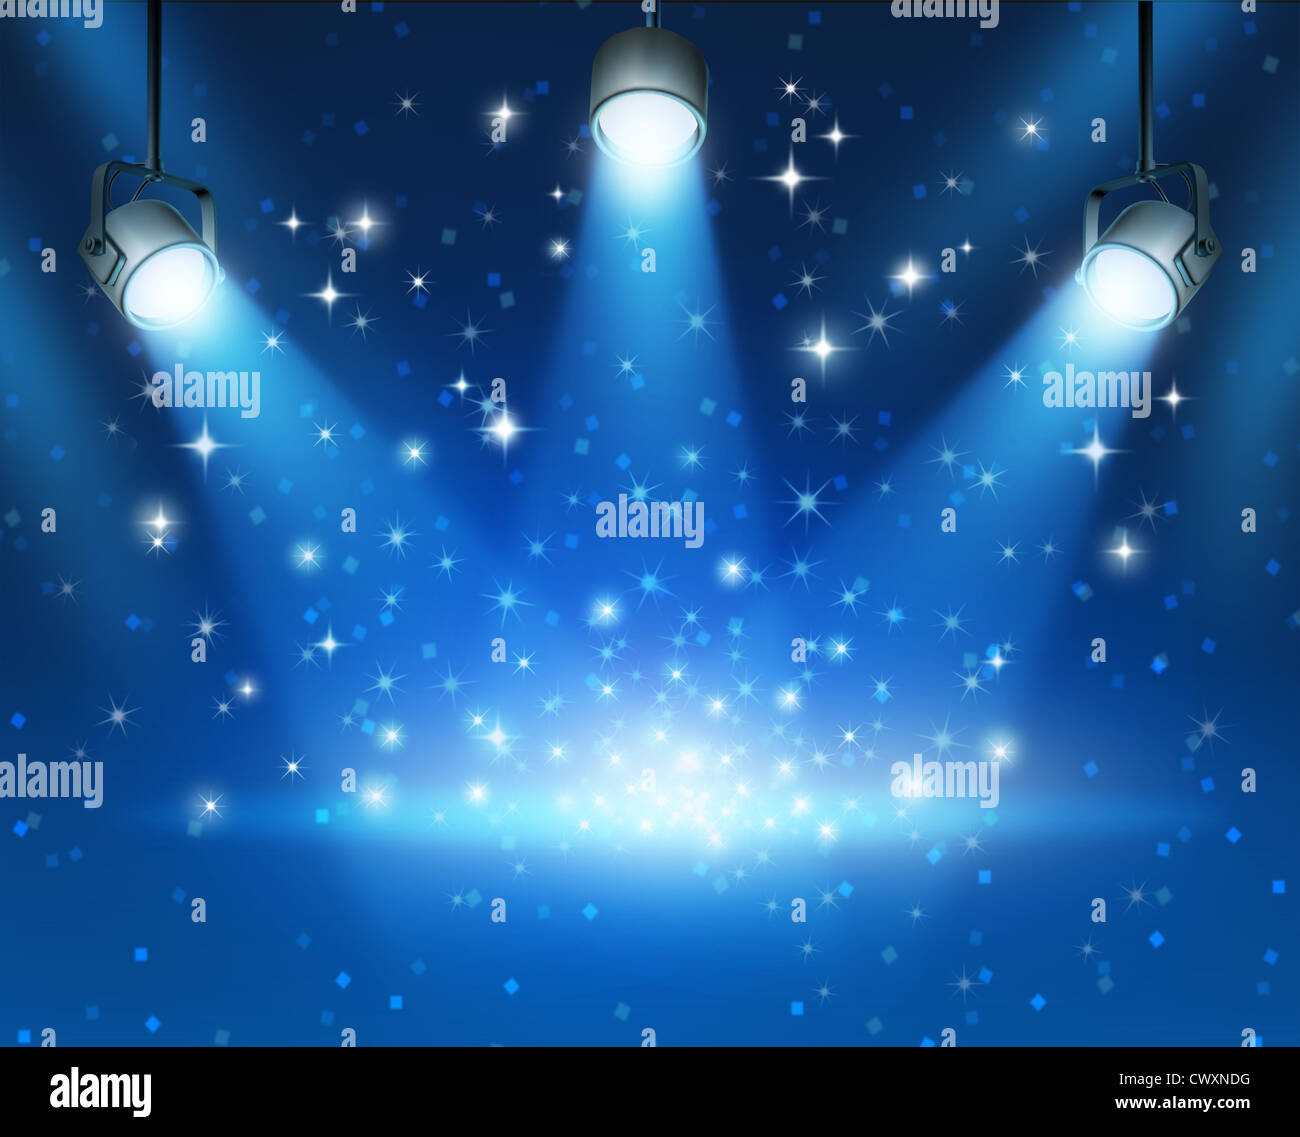 Magical blue abstract image of concert lighting against a dark glowing background Illustration with shiny sparkles with a blank Stock Photo